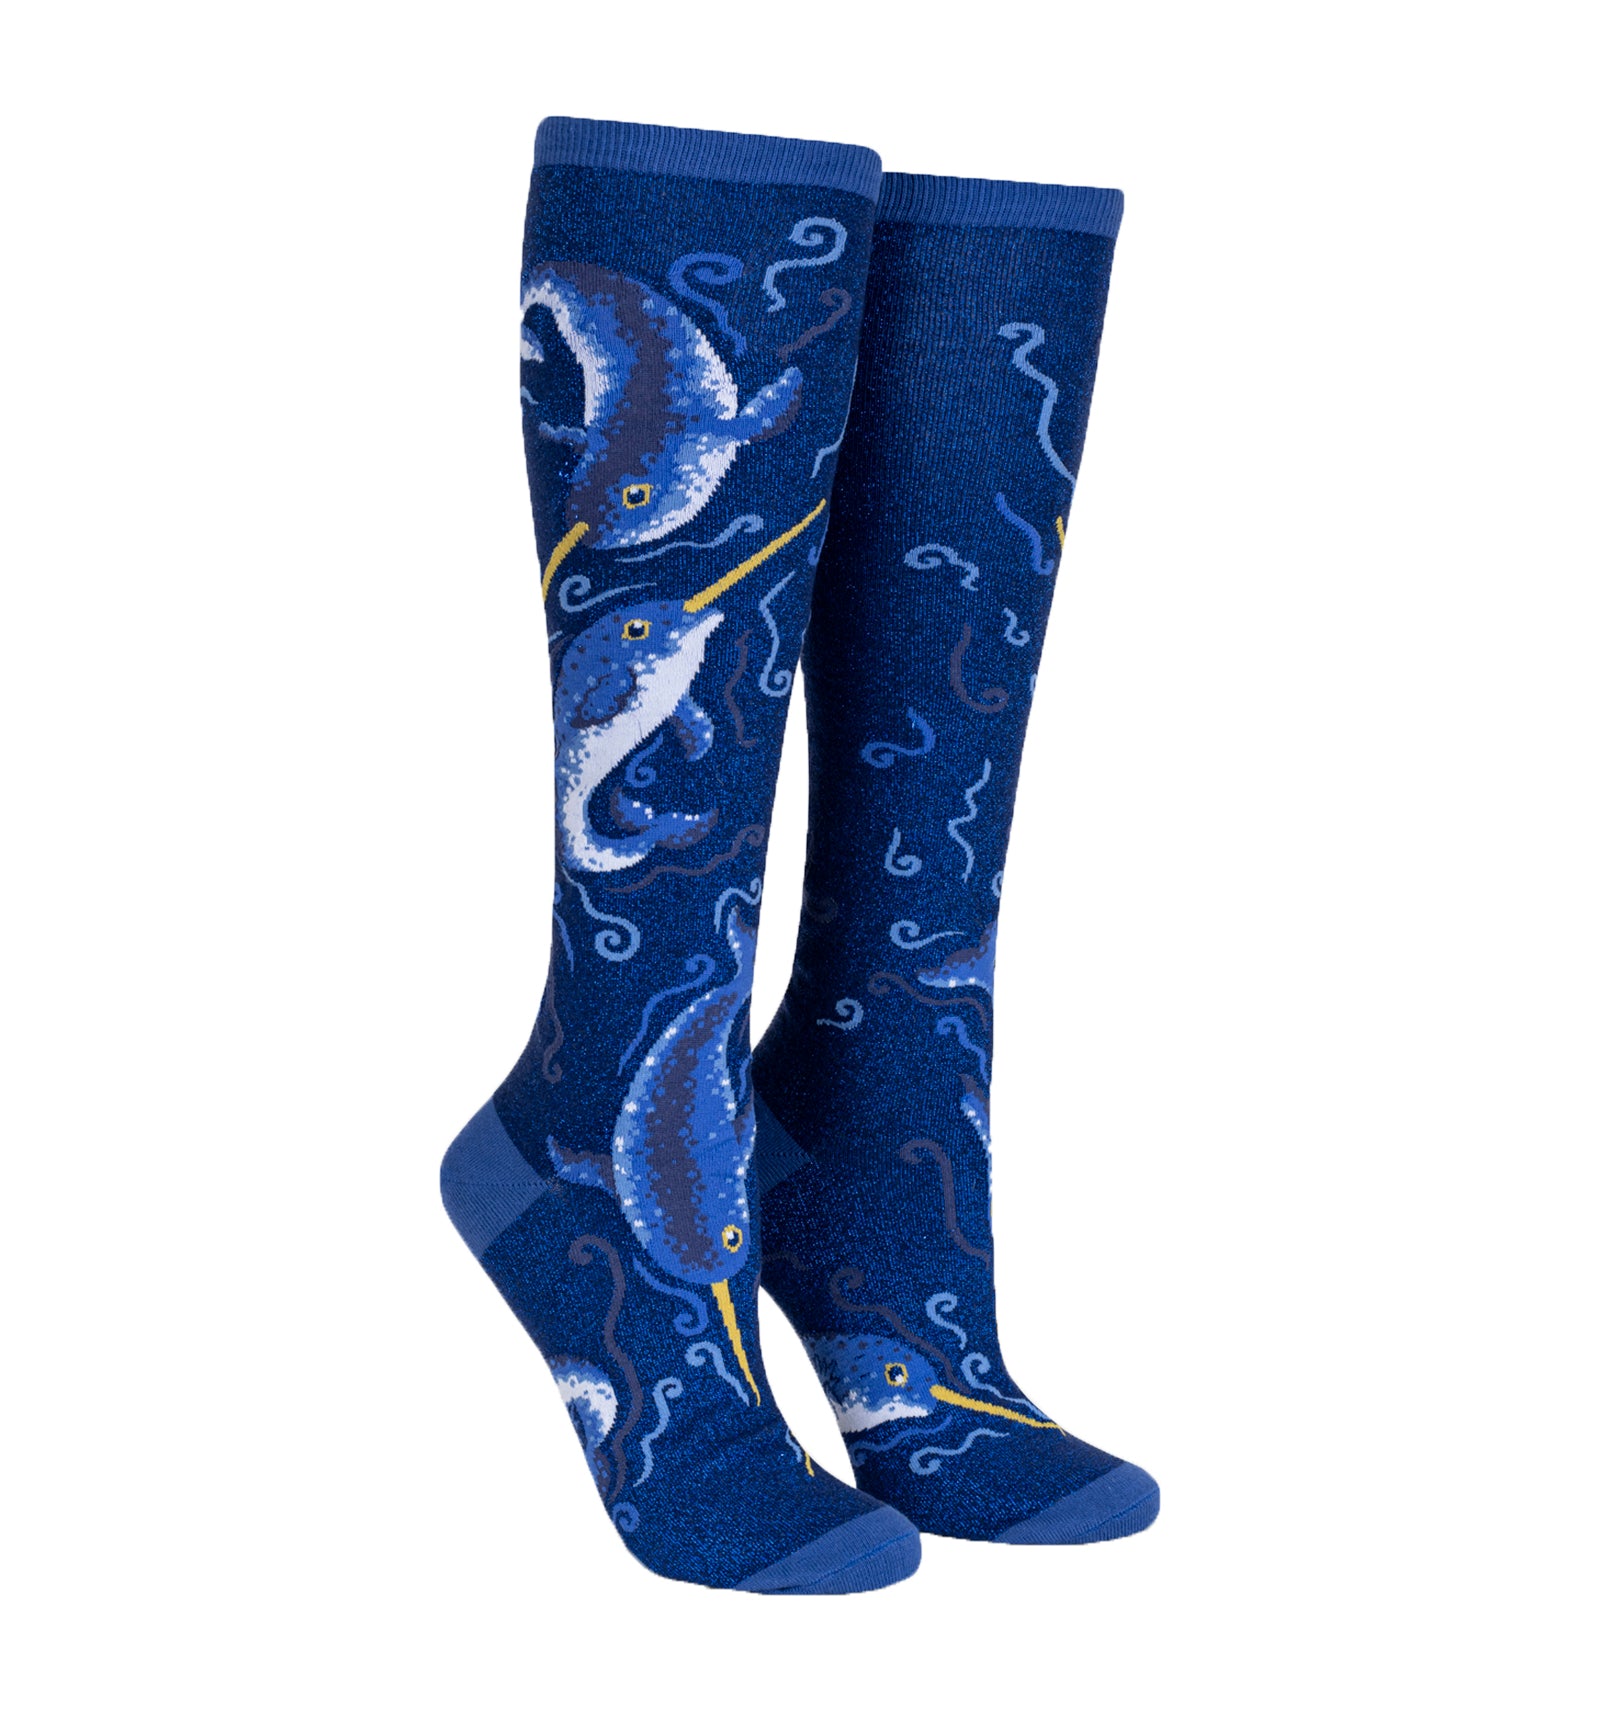 SOCK it to me Unisex Knee High Socks (F0631),Once Upon a Narwhal - Once Upon a Narwhal,One Size